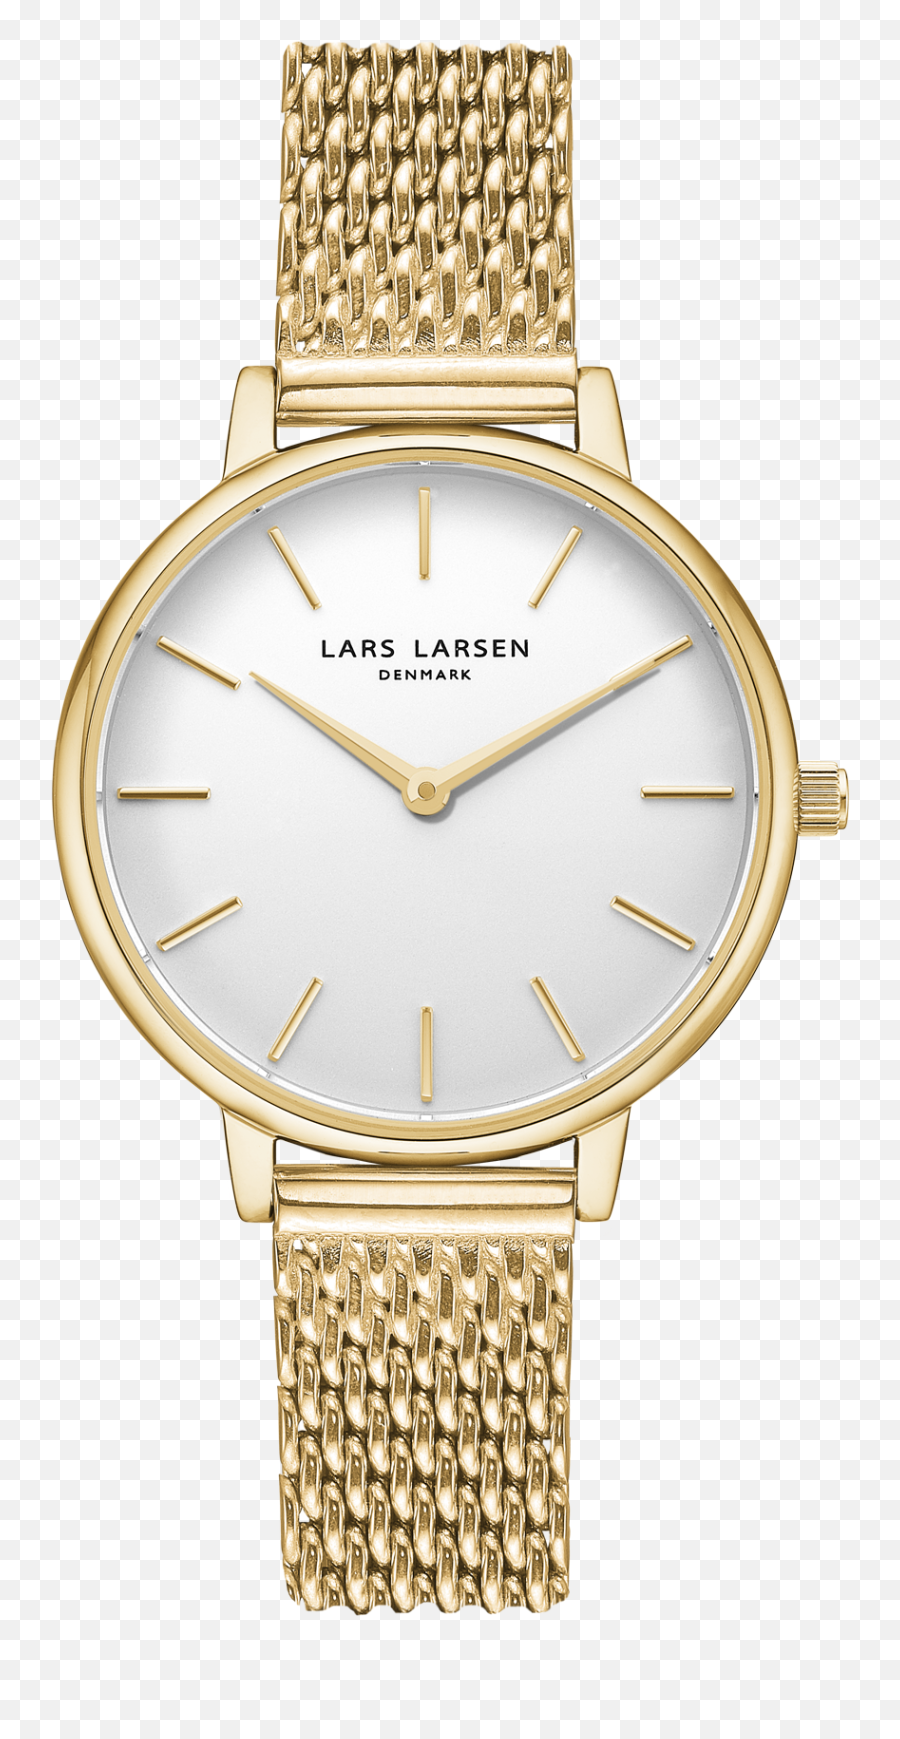 Download Gold Ladies Watch Png Image - Solid,Gold Watch Png